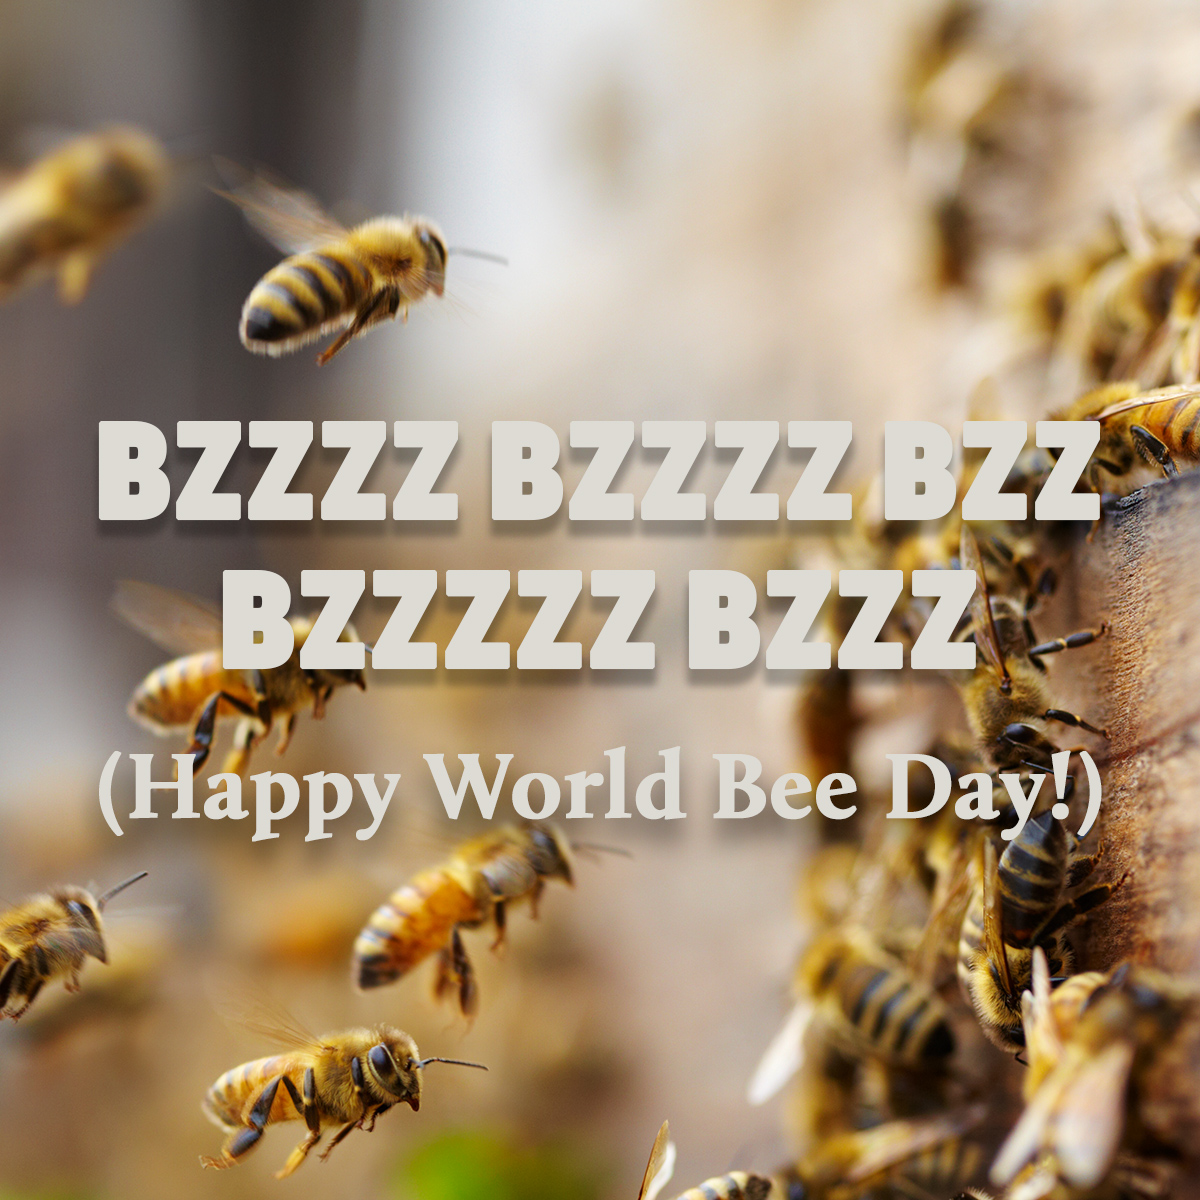 On this #WorldBeeDay, we're shouting our love of bees from the treetops. These hard-working pollinators are responsible for about one out of every three bites of food we eat and 80% of the world’s flowering plants. Take today to celebrate these small, amazing creatures 🐝